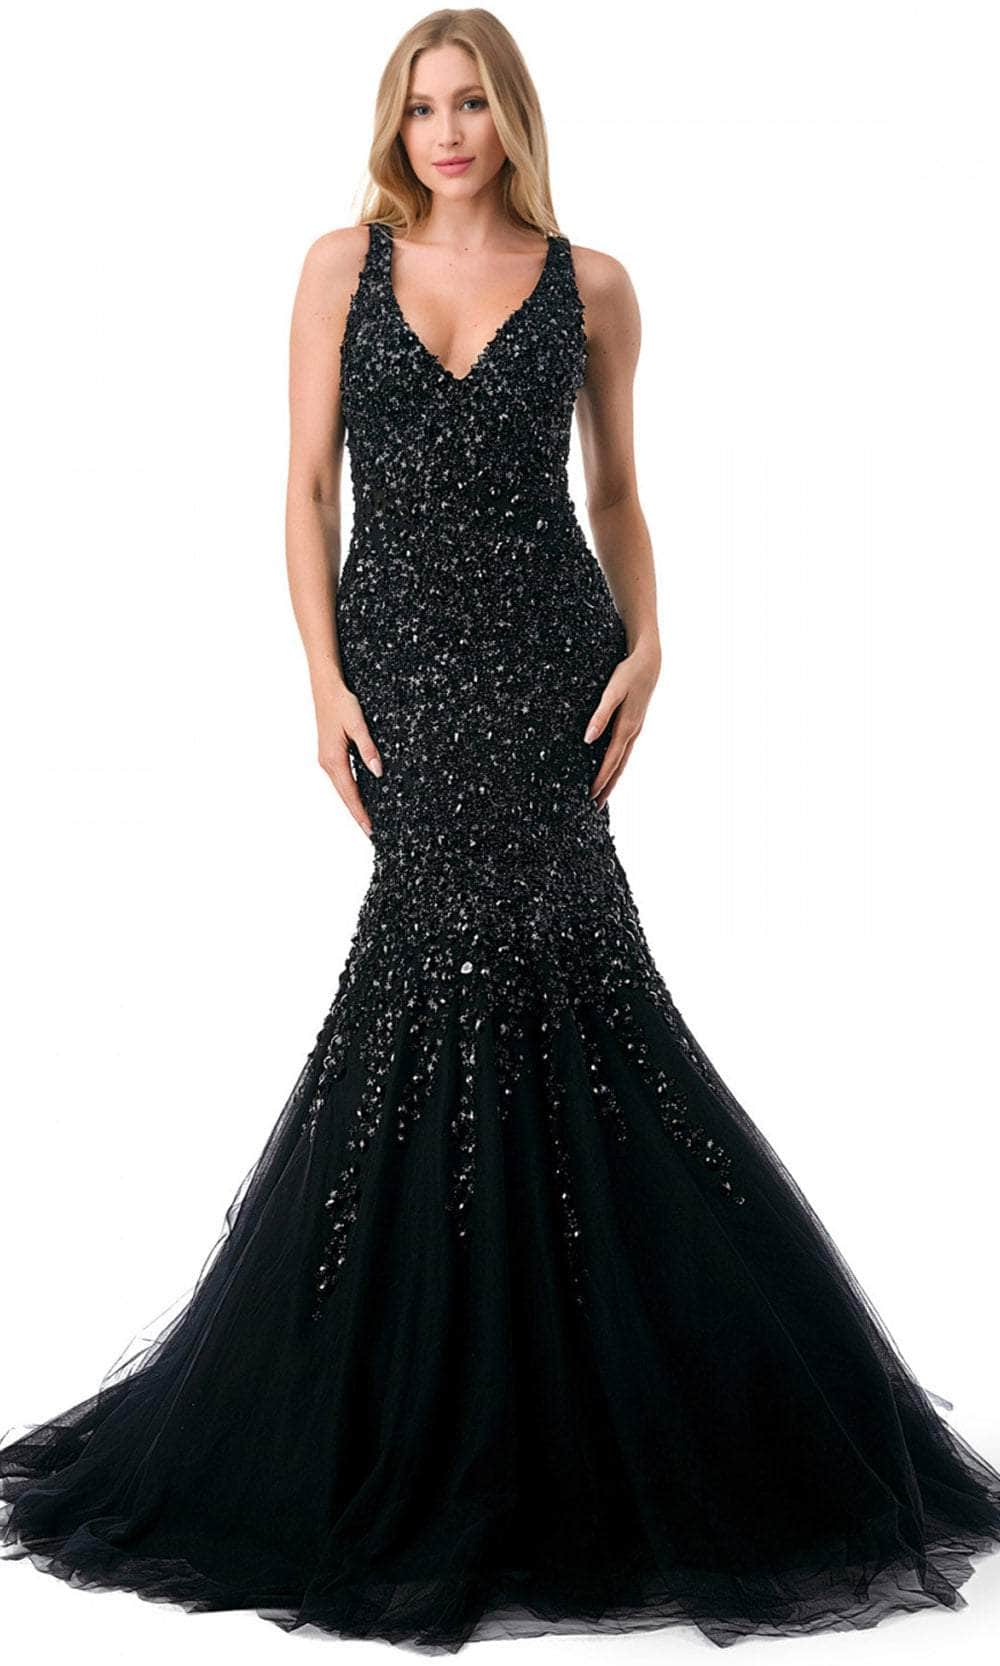 Image of Aspeed Design L2802K - Cutout Back Mermaid Evening Gown